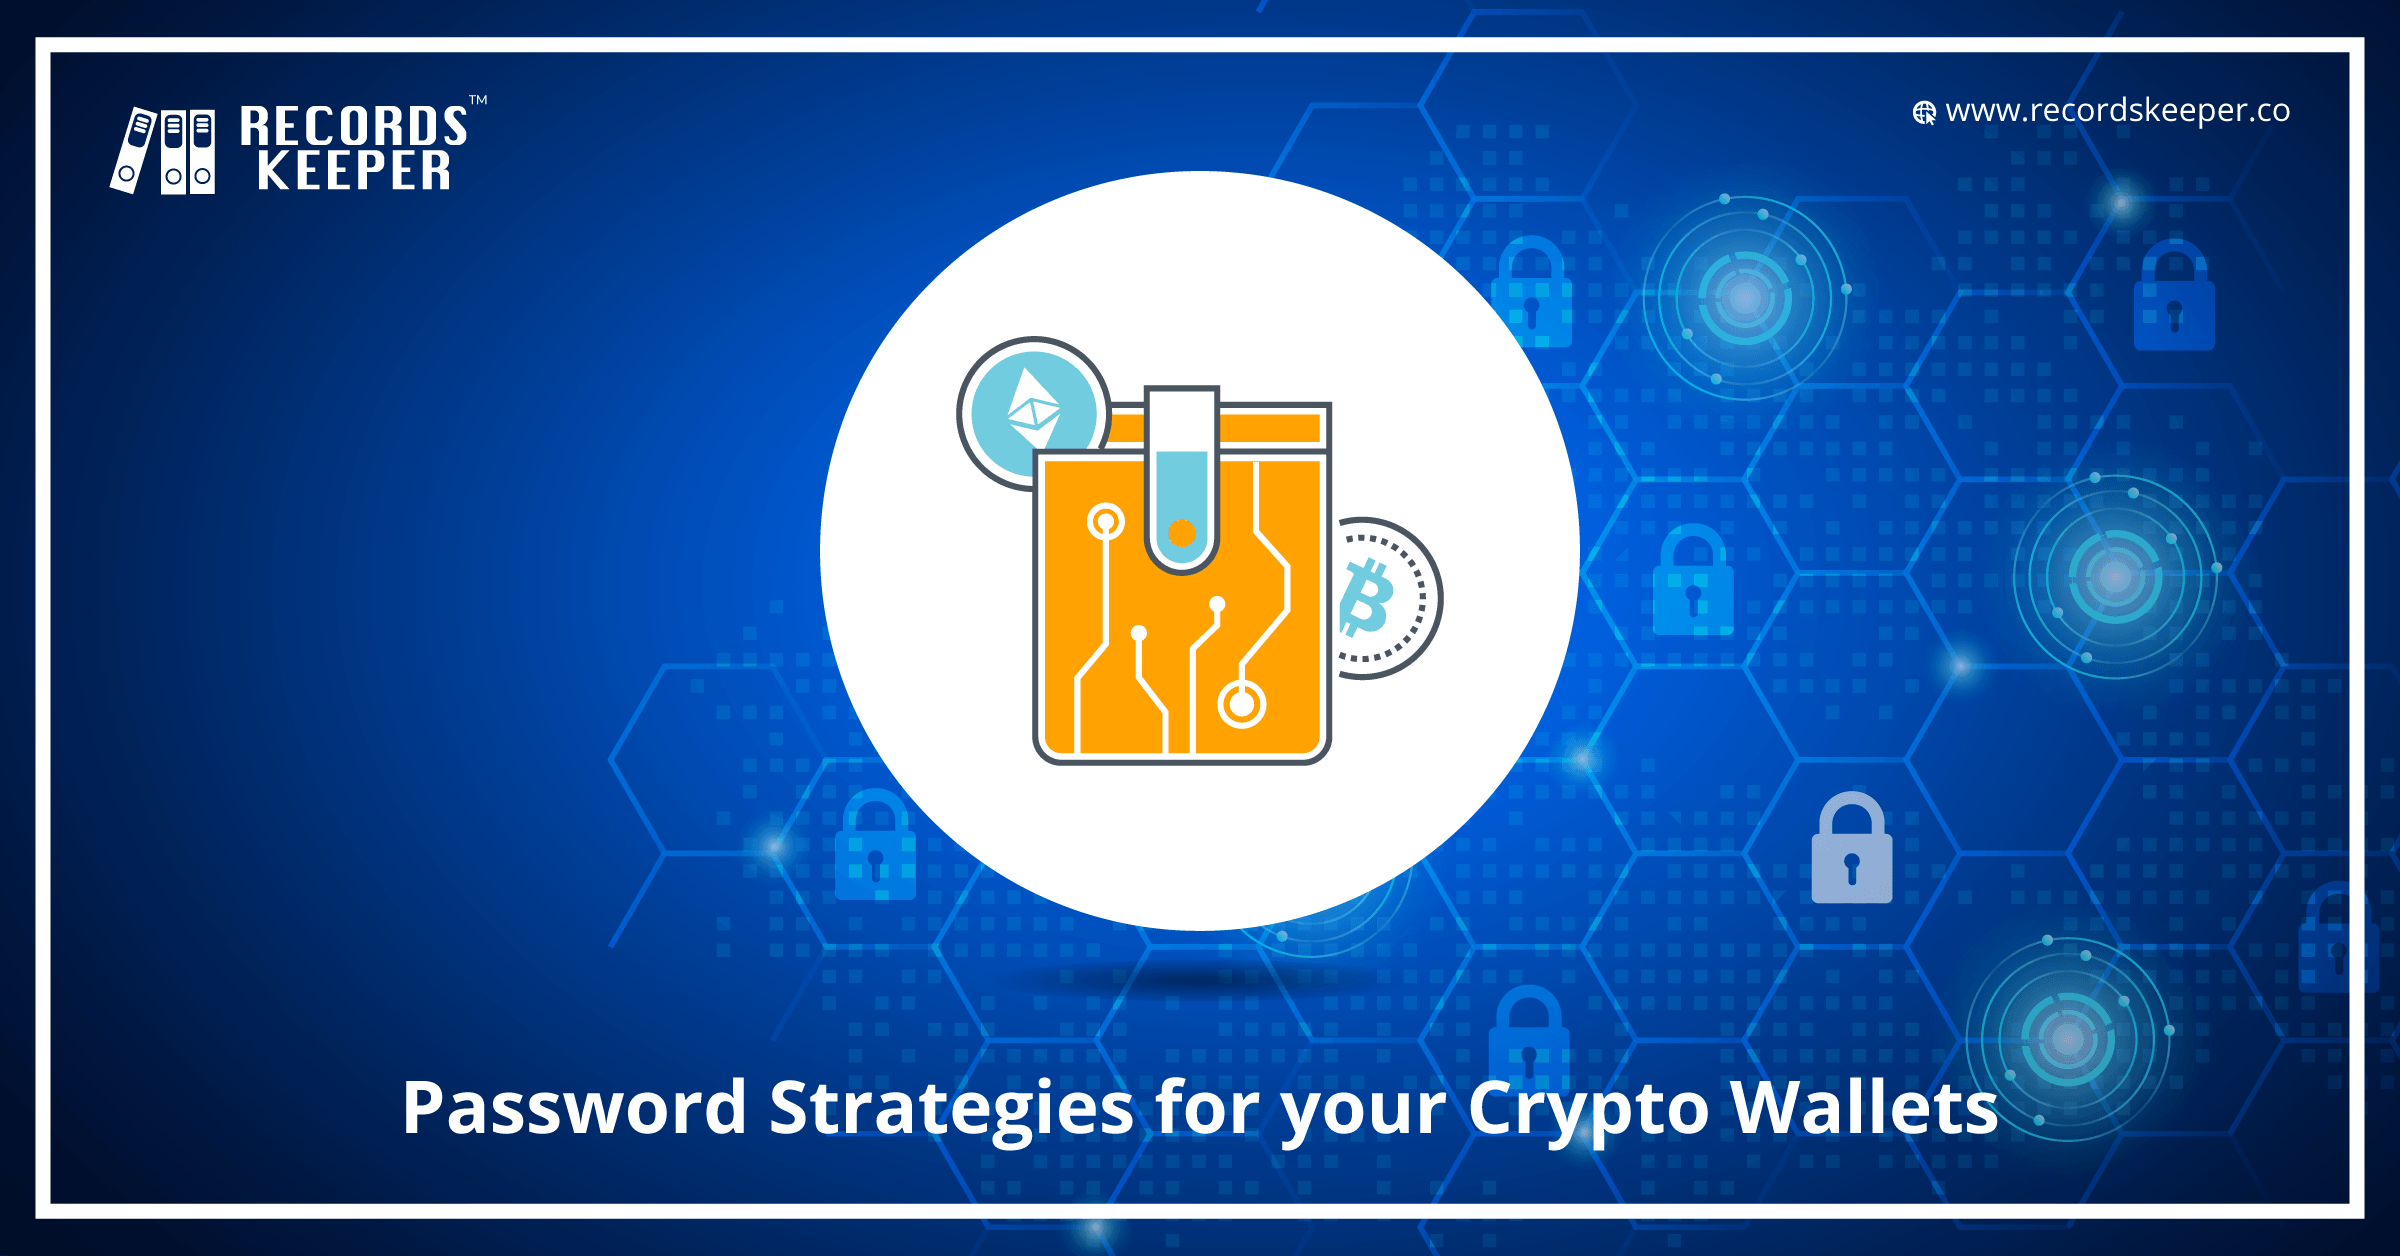 Password Strategies for your Crypto Wallet